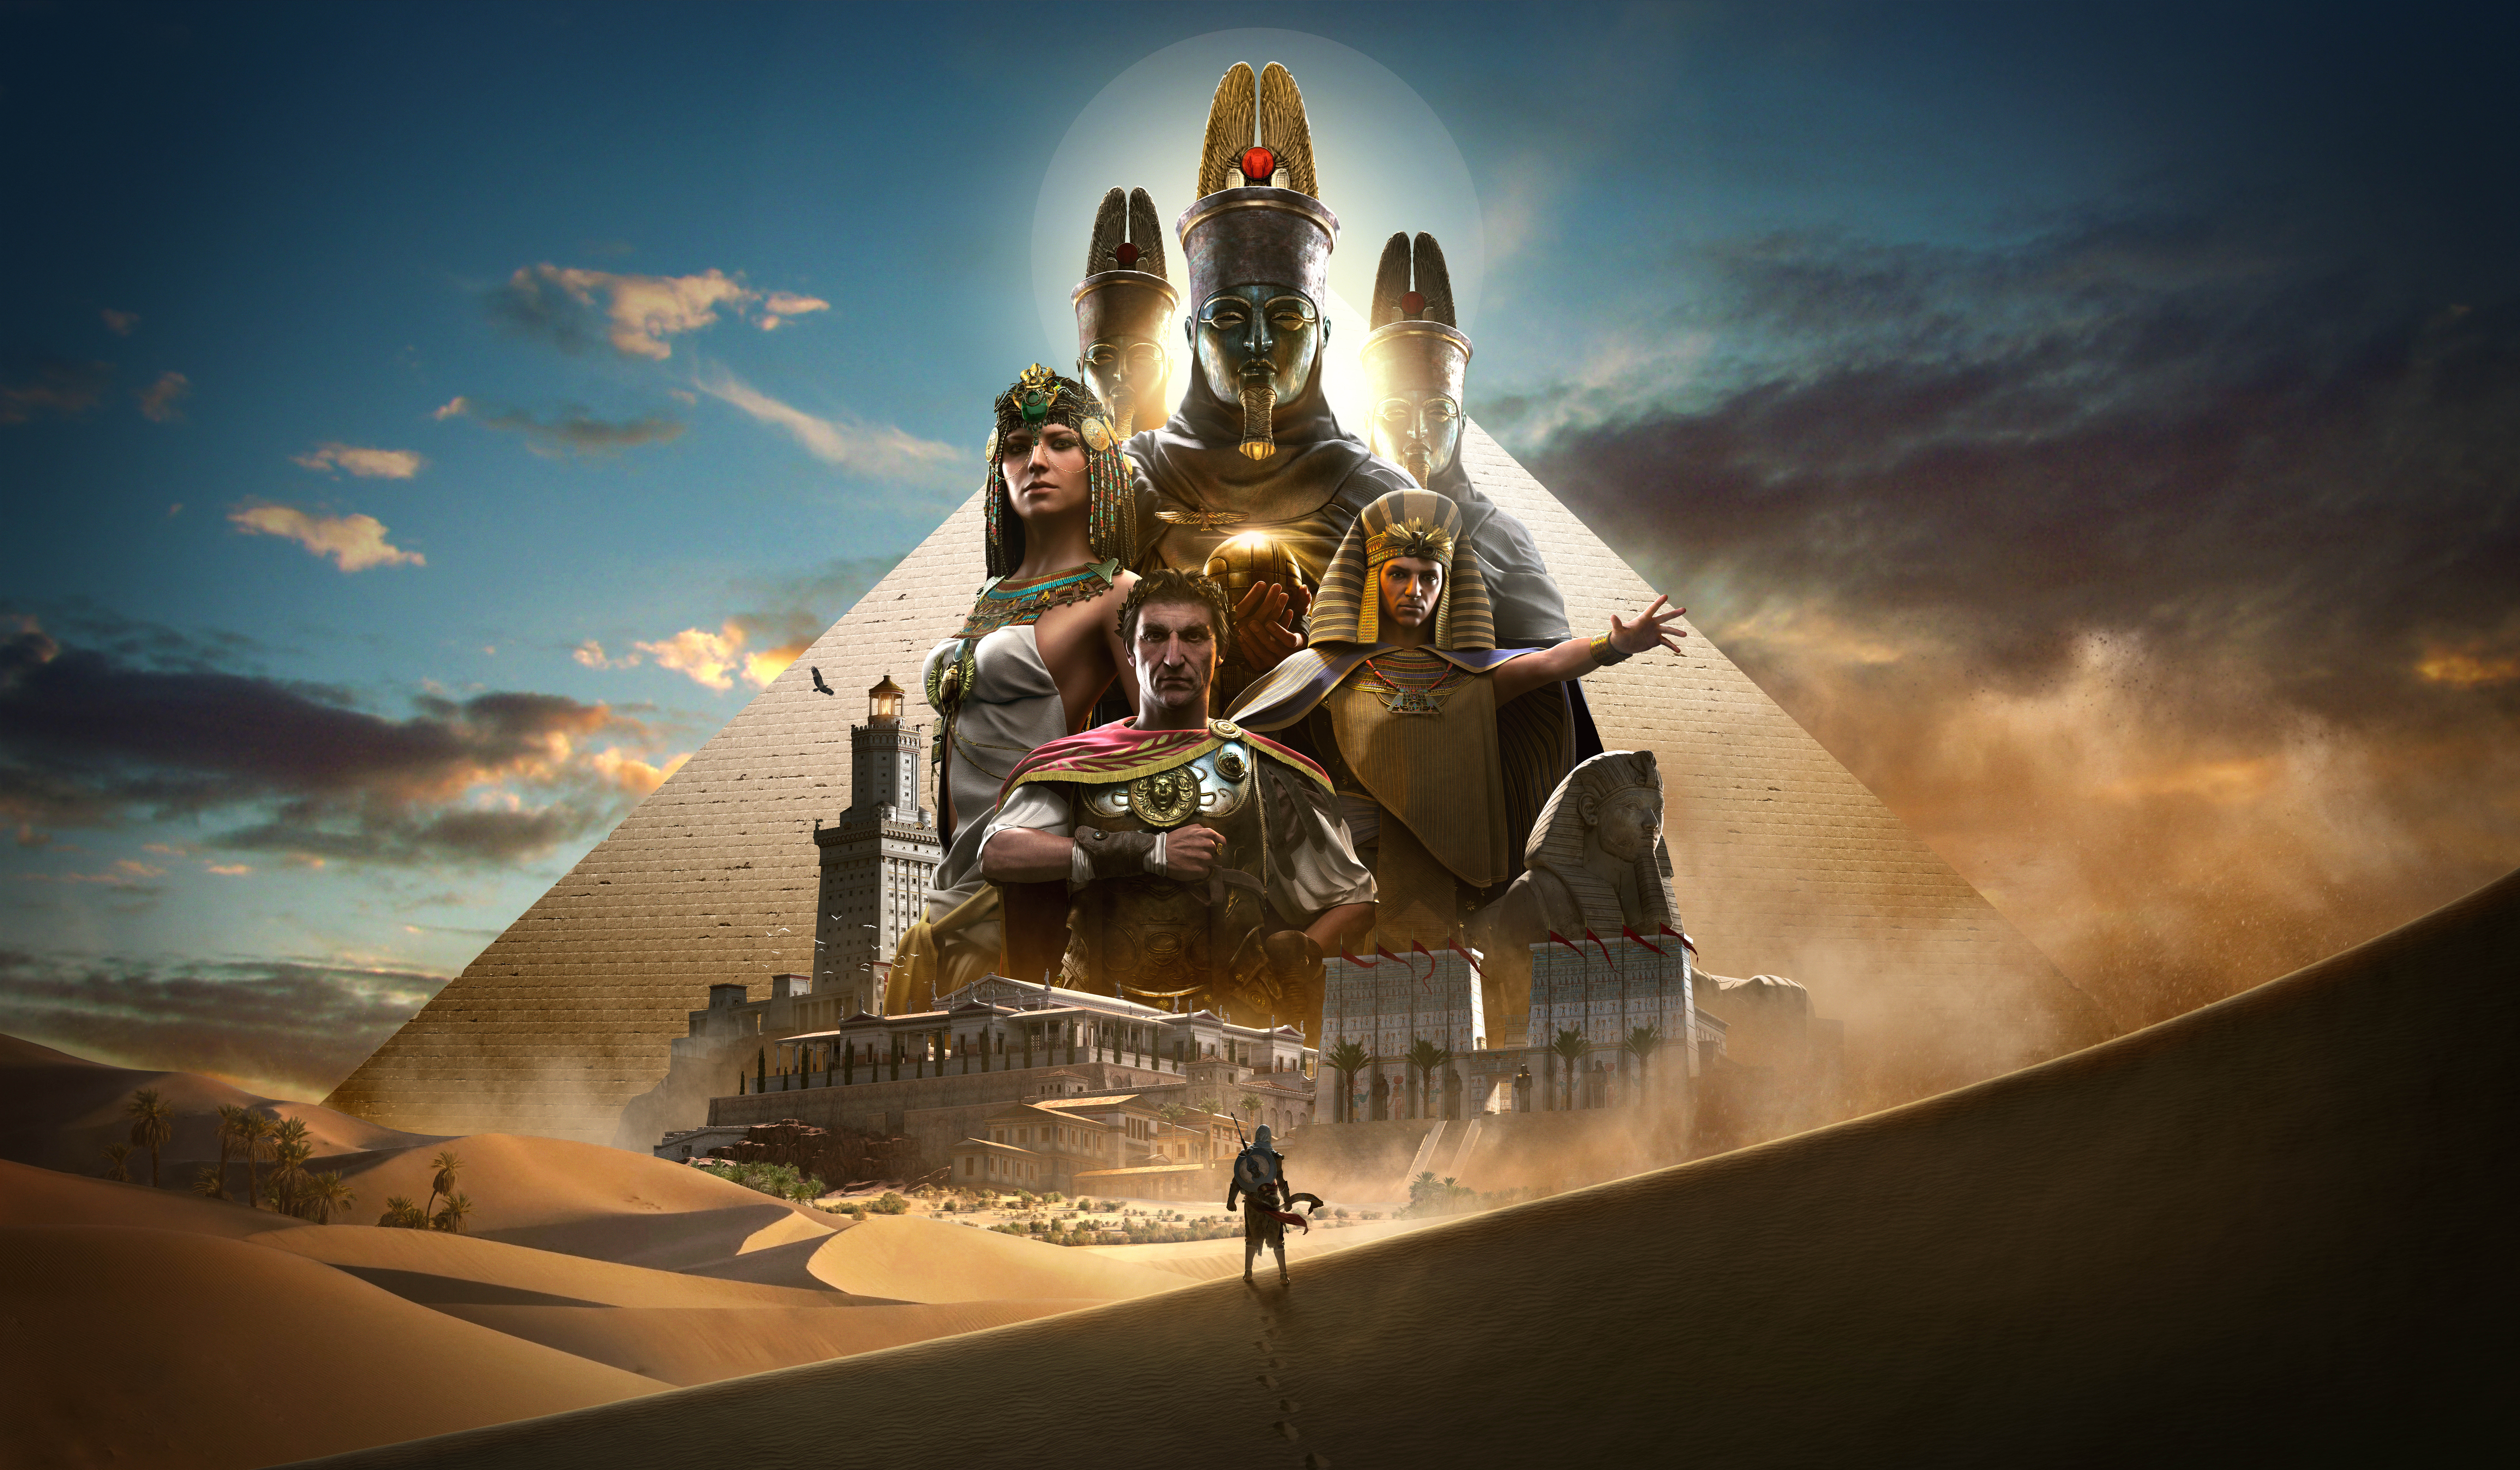 Video Game Assassin's Creed Origins HD Wallpaper | Background Image